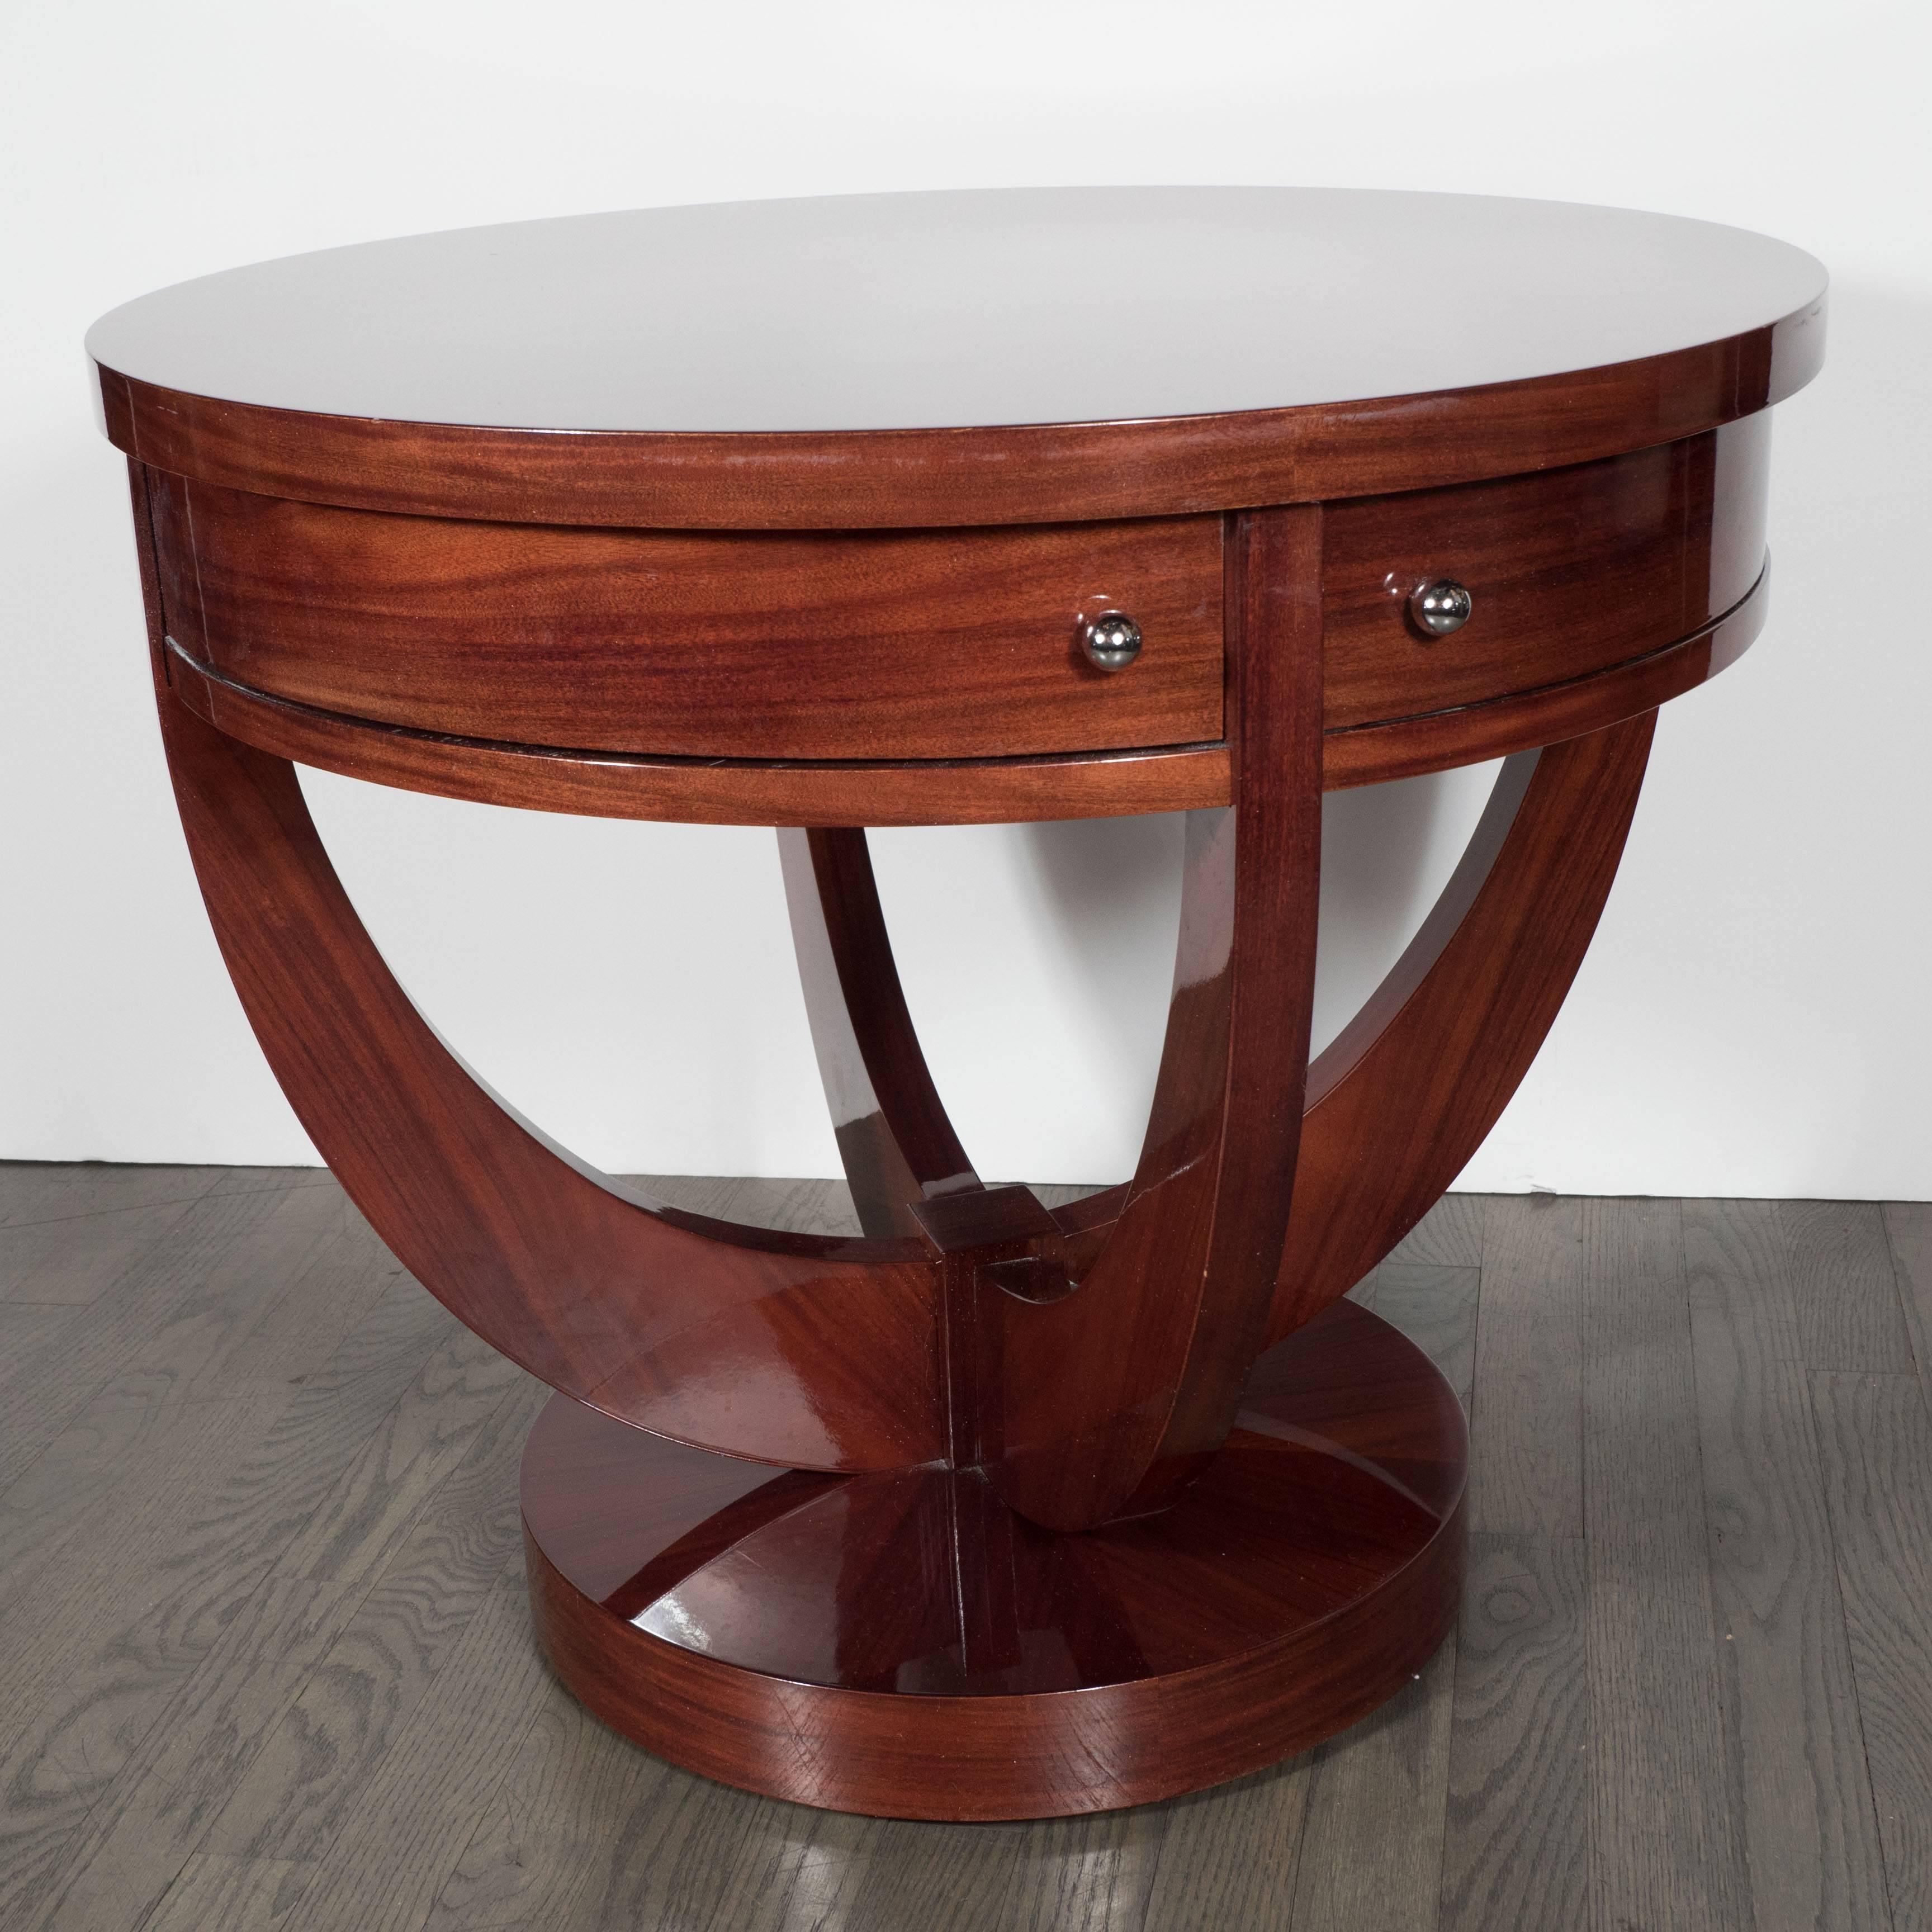 Art Deco gueridon compass-style table in book-matched mahogany. A circular base with four curved supports holds a table base which features four pie-shaped drawers, each fitted with a chrome ball pull. A beautifully book-matched, substantially sized